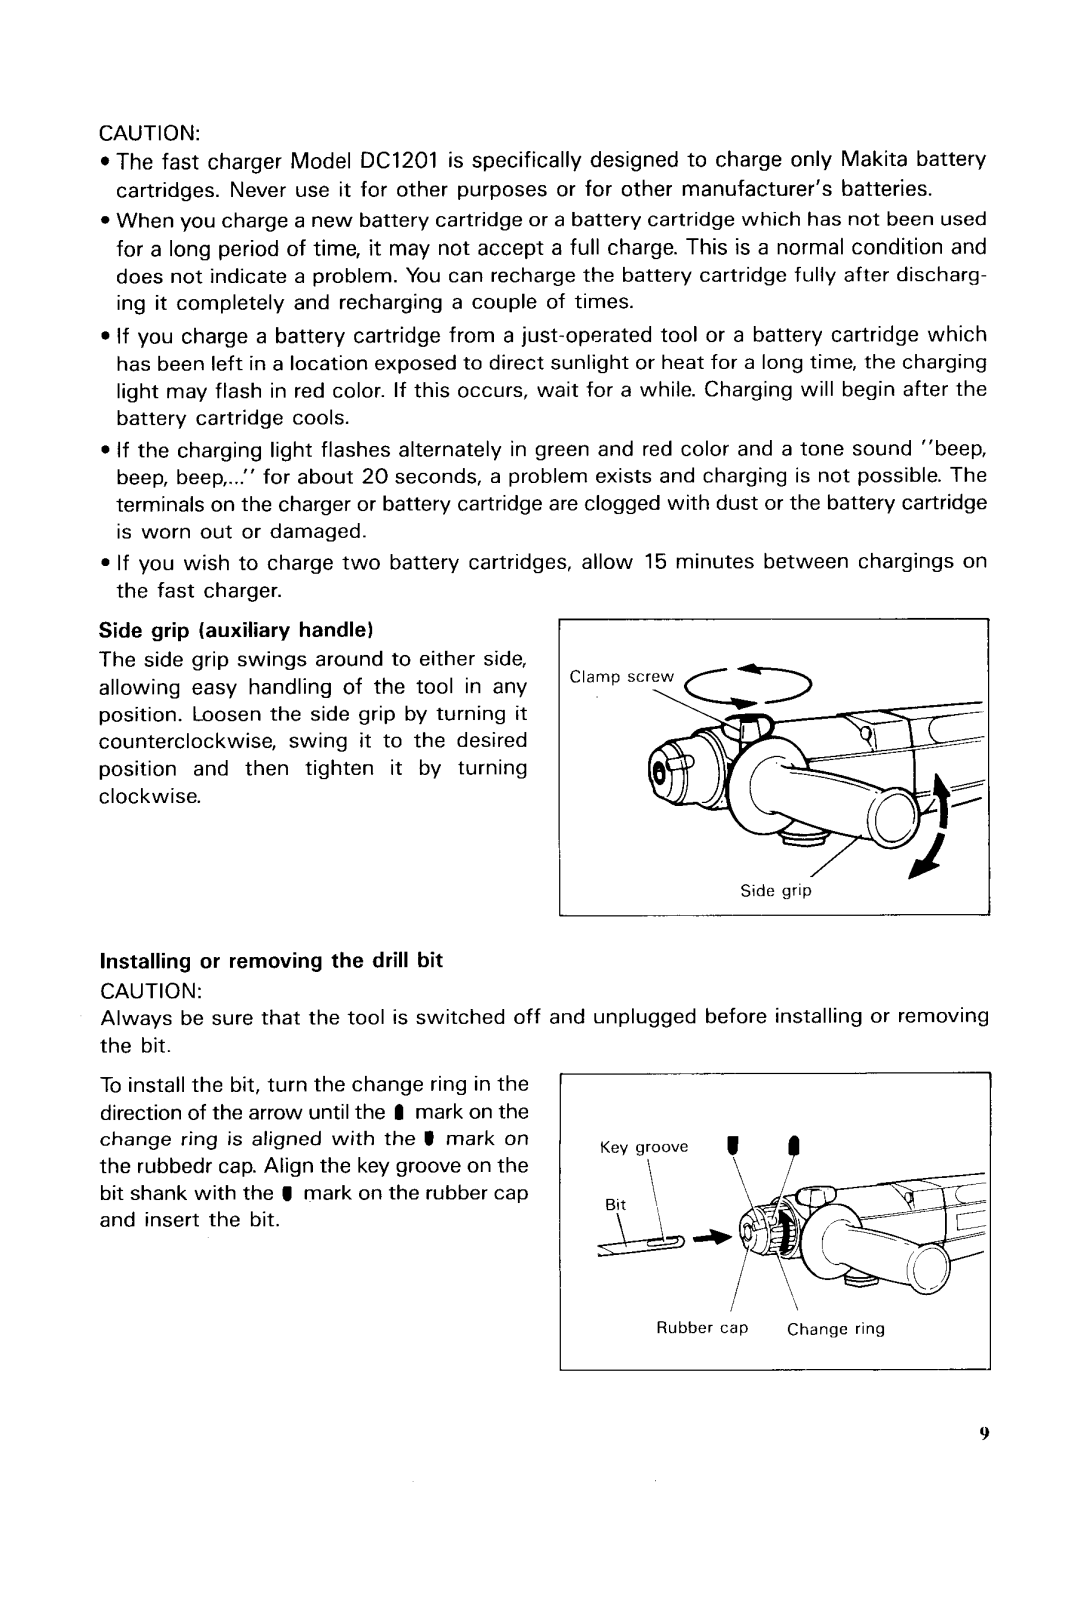 Makita HRIGODH instruction manual Side grip auxiliary handle, Installing or removing the drill bit 